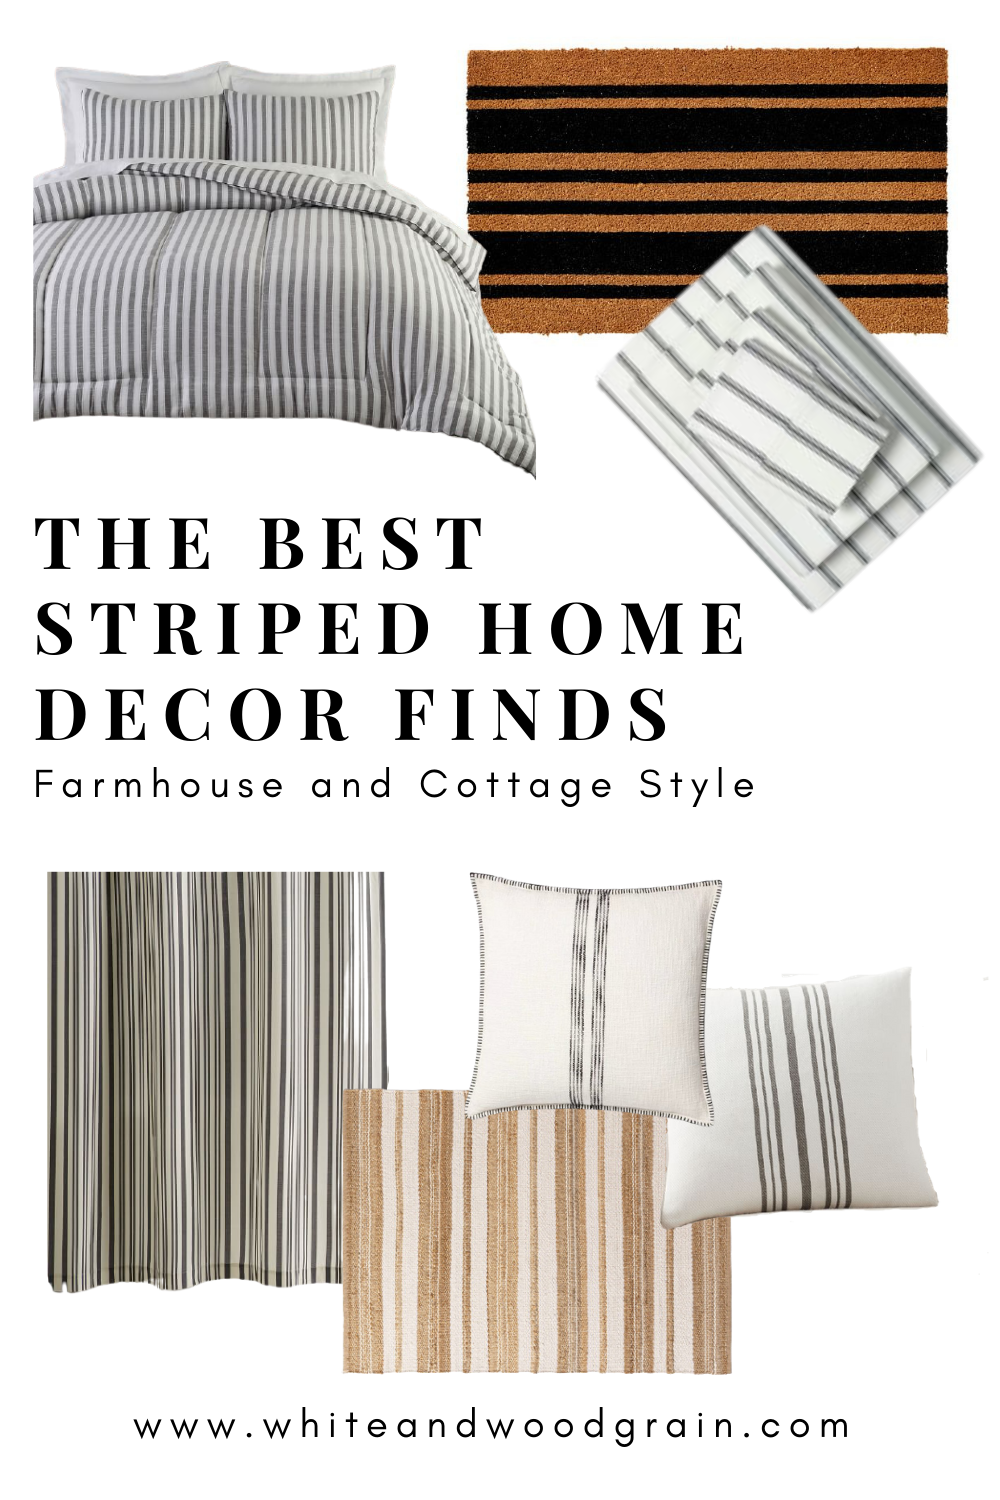 The Best Striped Home Decor Finds